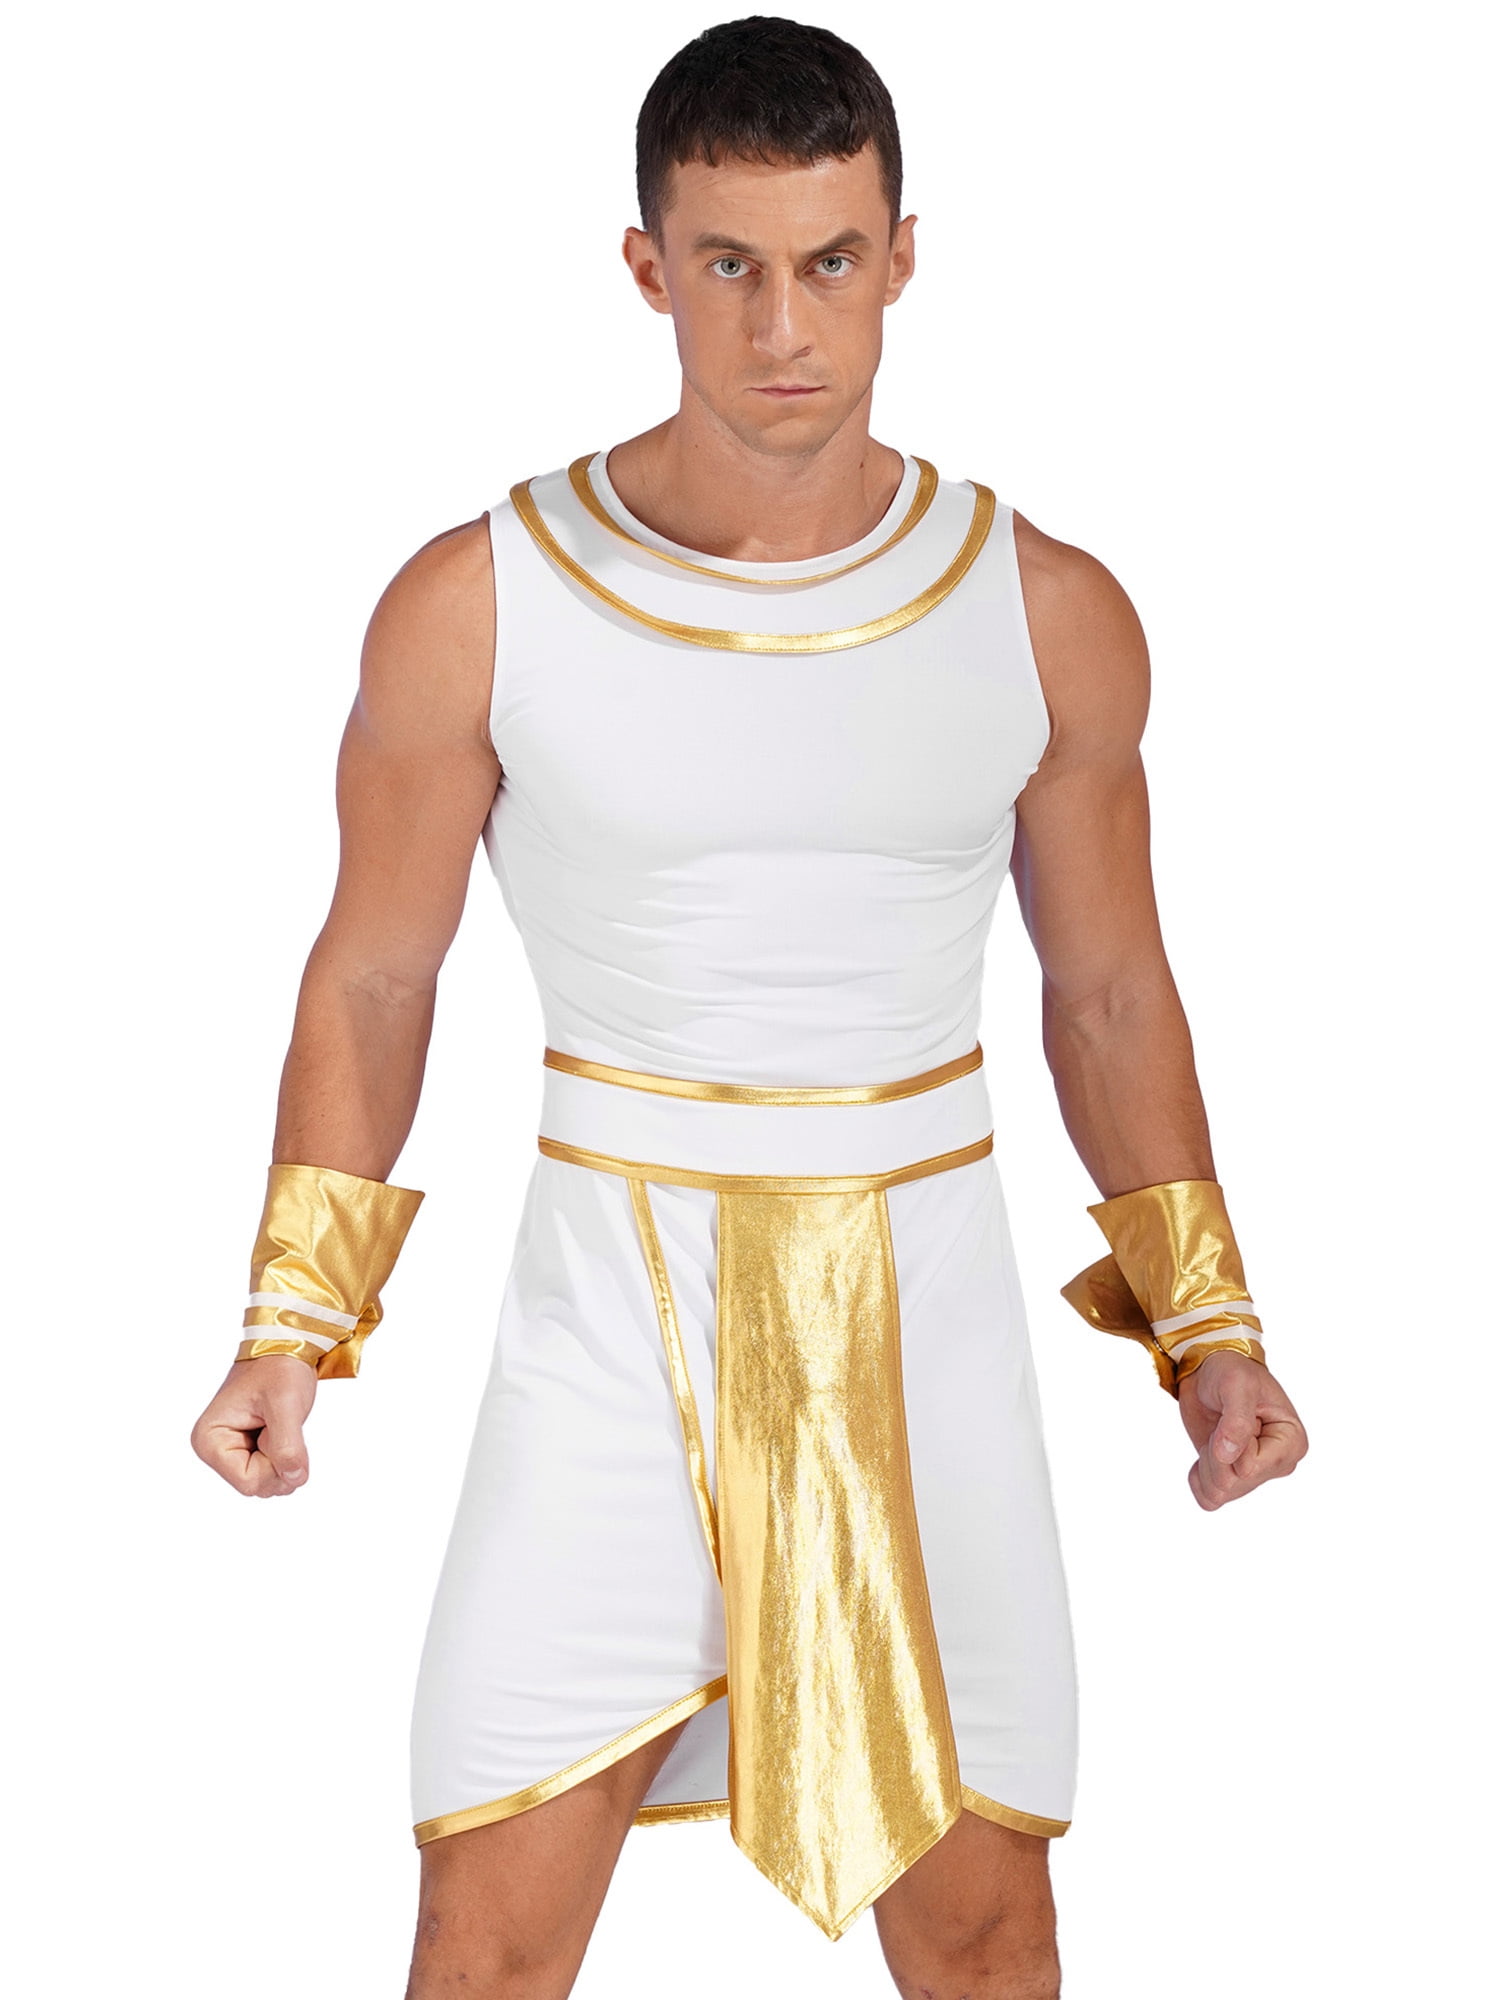 inhzoy Mens 3PCs Mens Ancient Egypt Greek Gladiator Warrior Cosplay Outfits  White L 